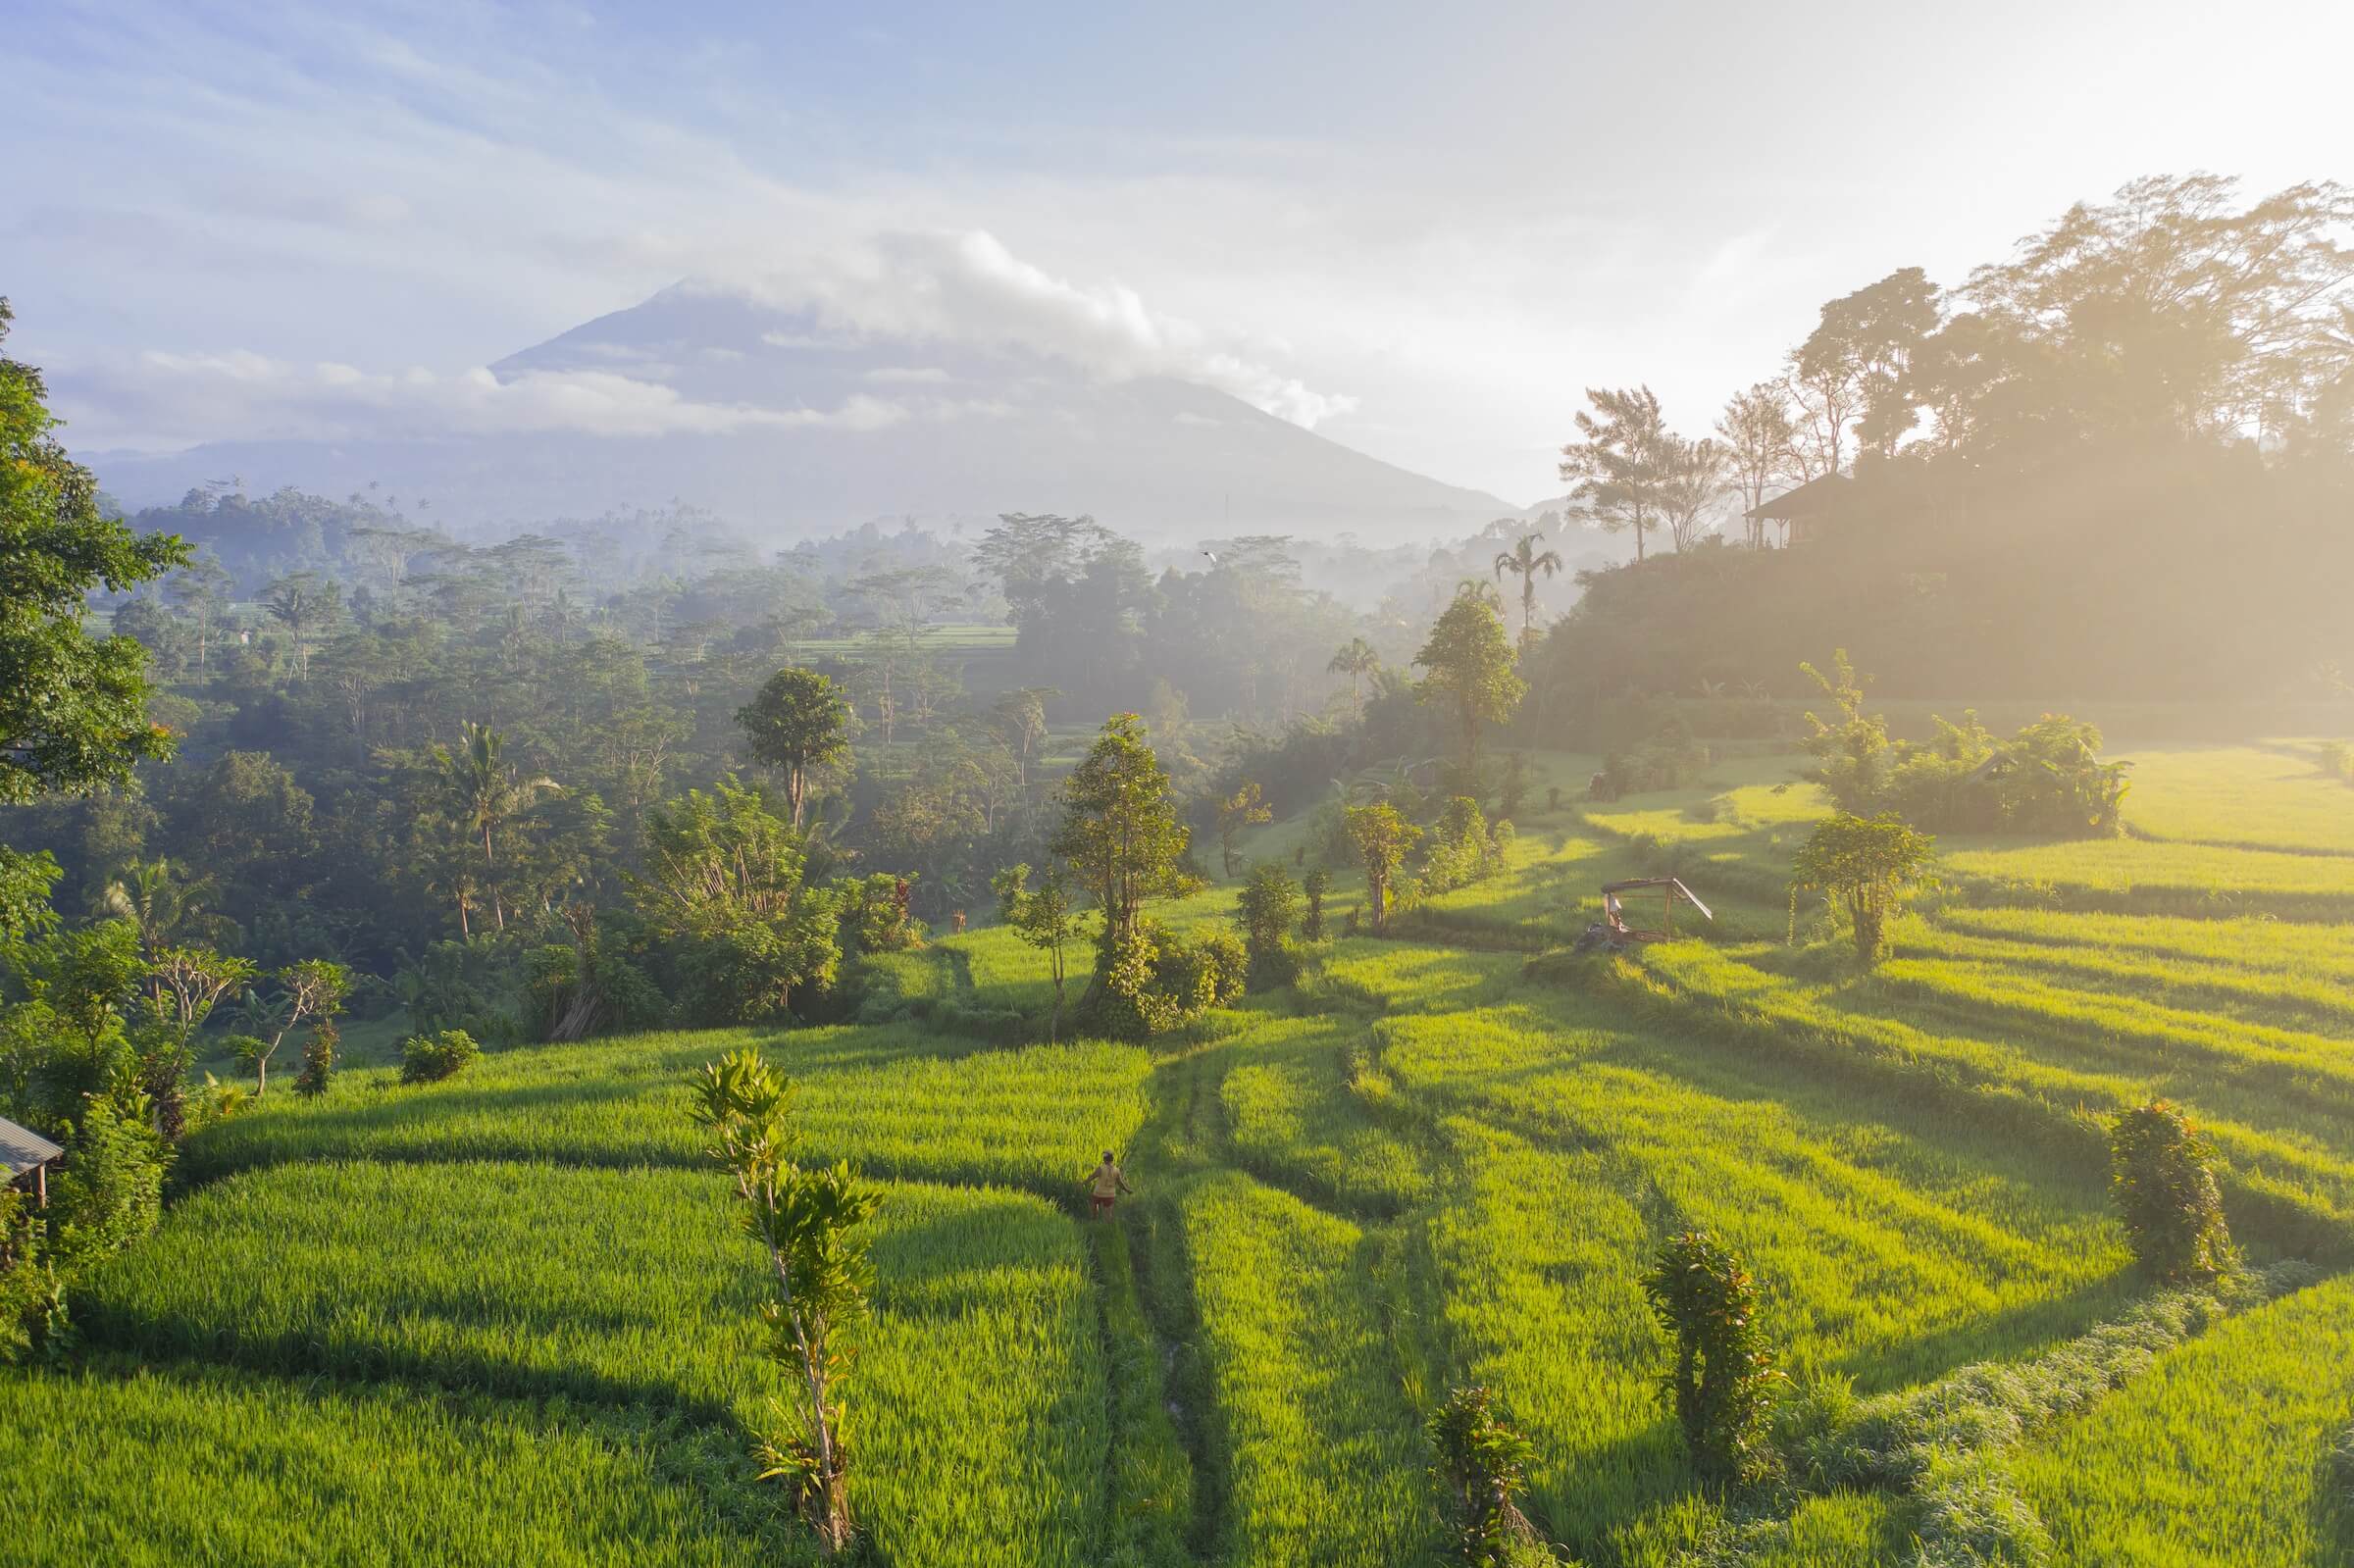 3 days in Bali itinerary. This is an image of Mount Agung with clouds at its top and surrounded by lush green terraced rice fields.